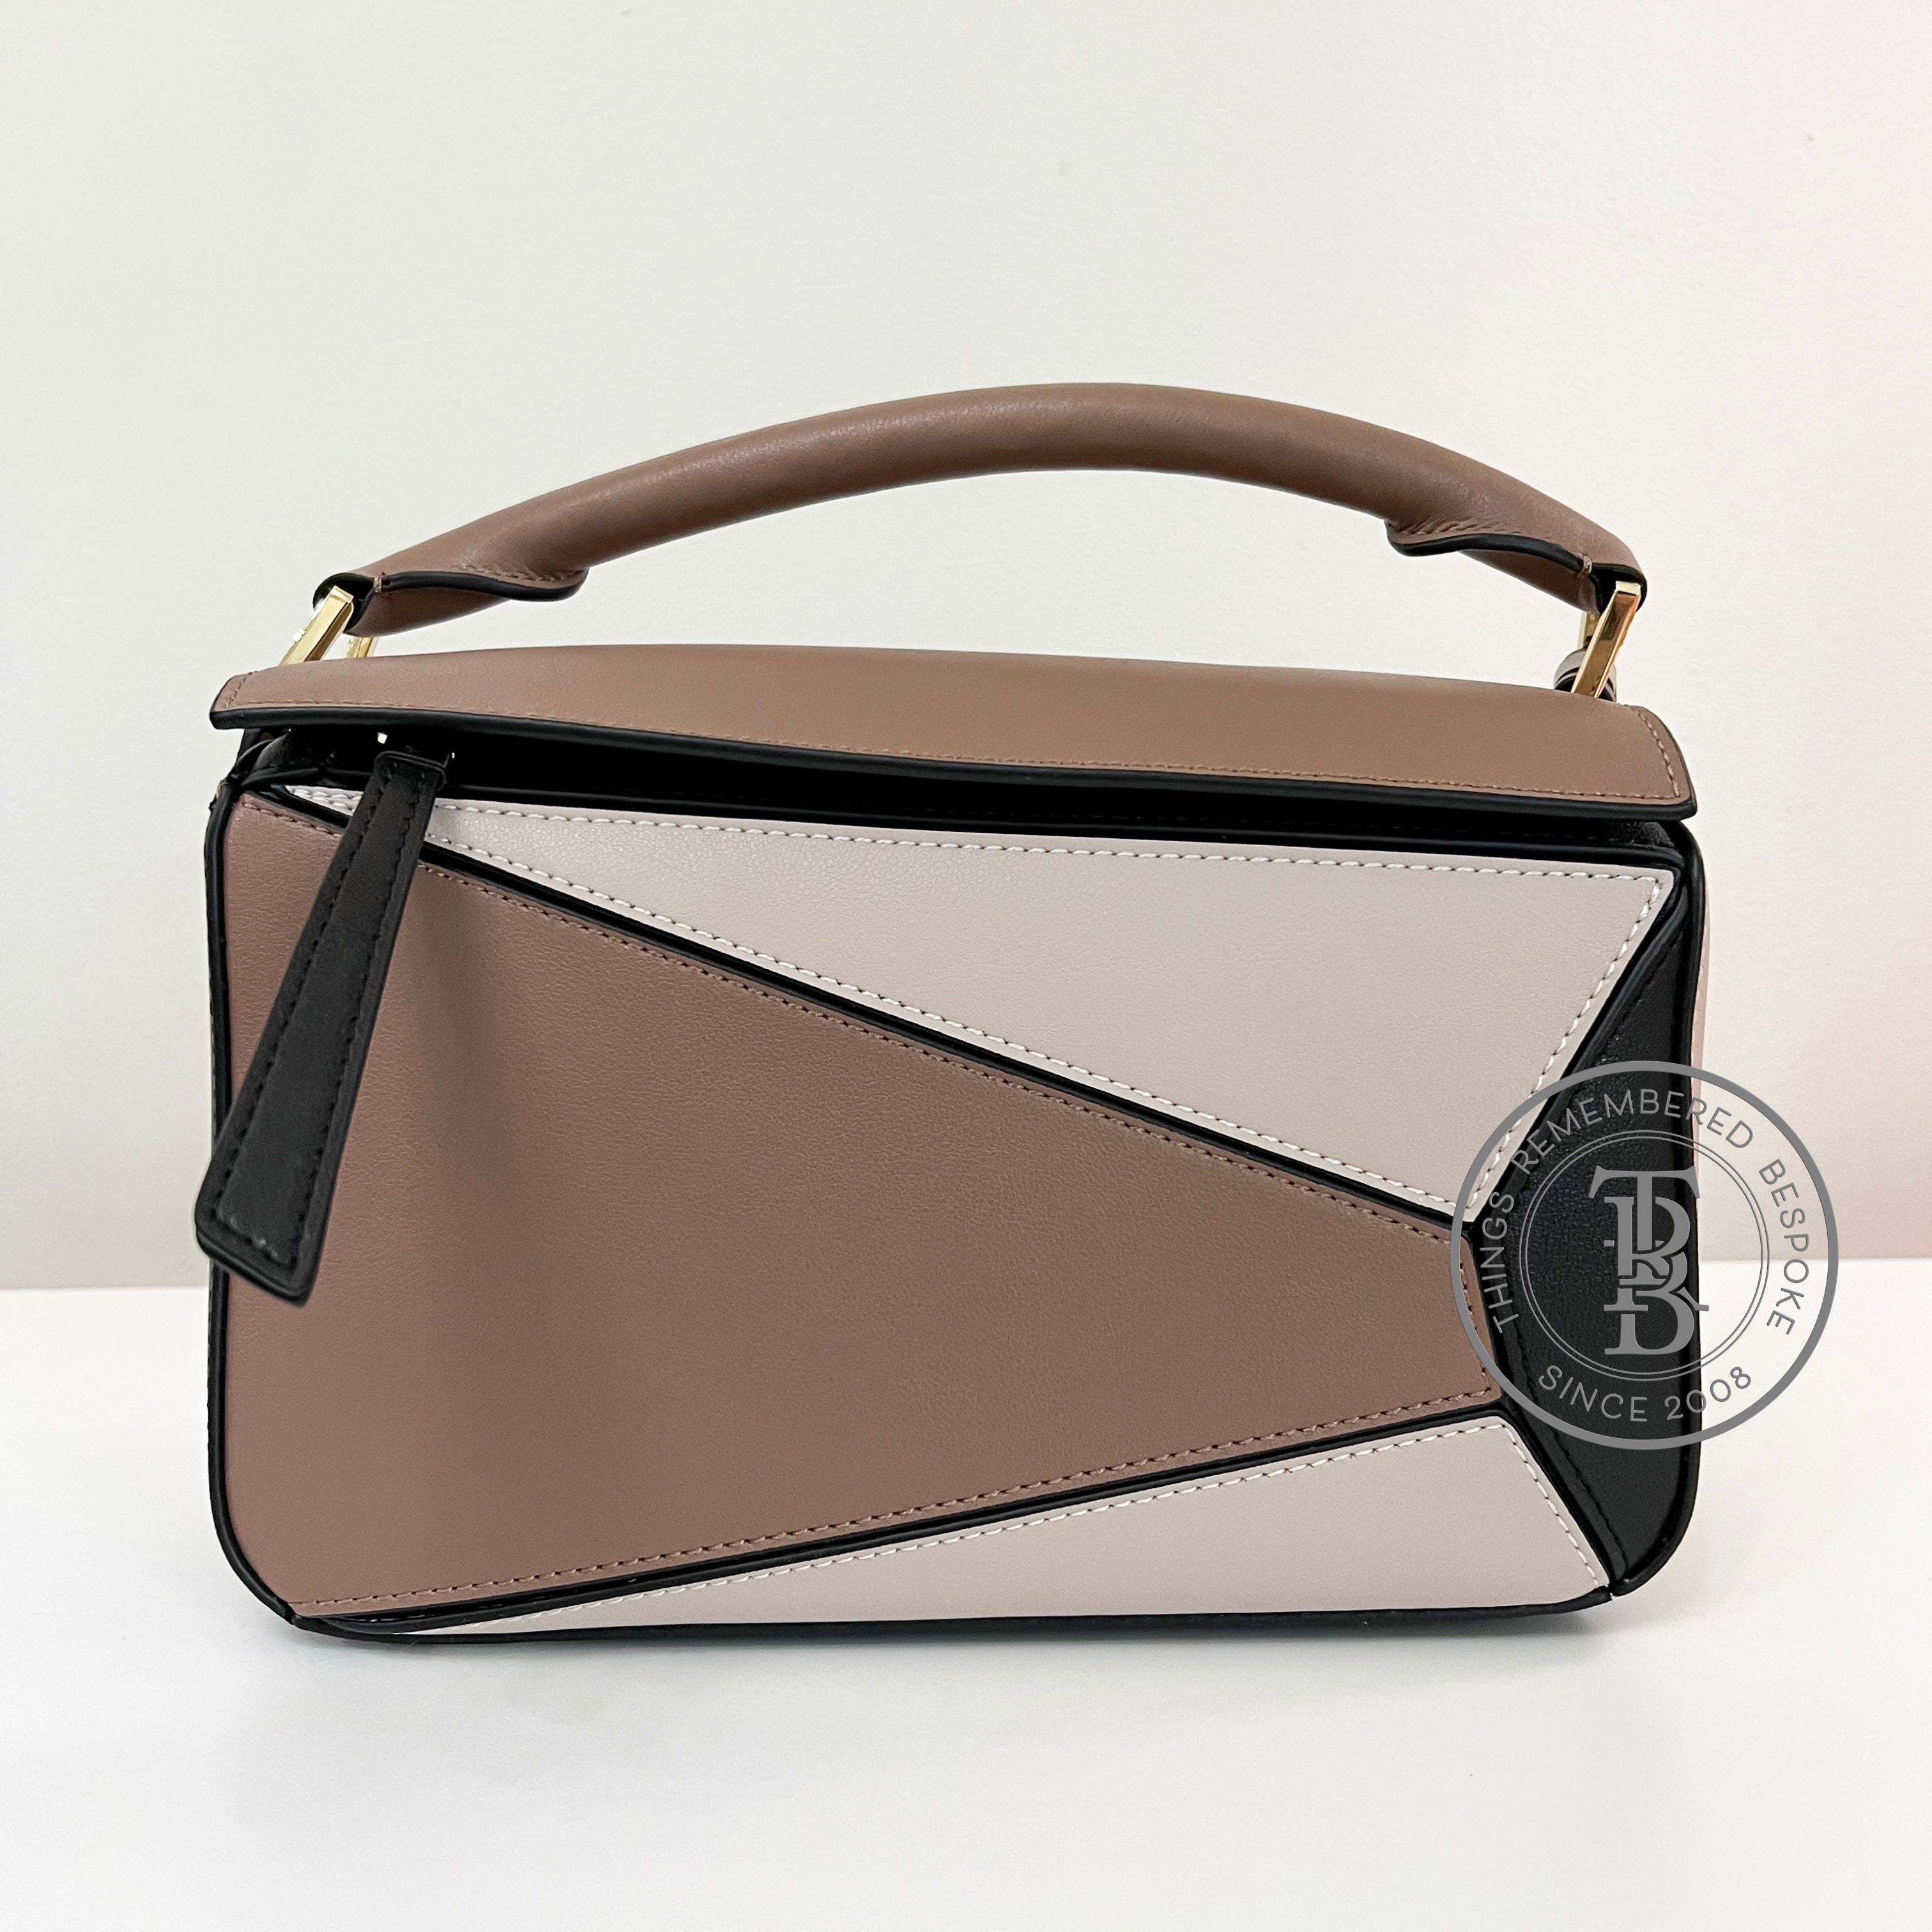 Introducing 'TRIO' mini bag - unique in its design, creates a beautiful  geometric balance with its triangular form and versatility to…